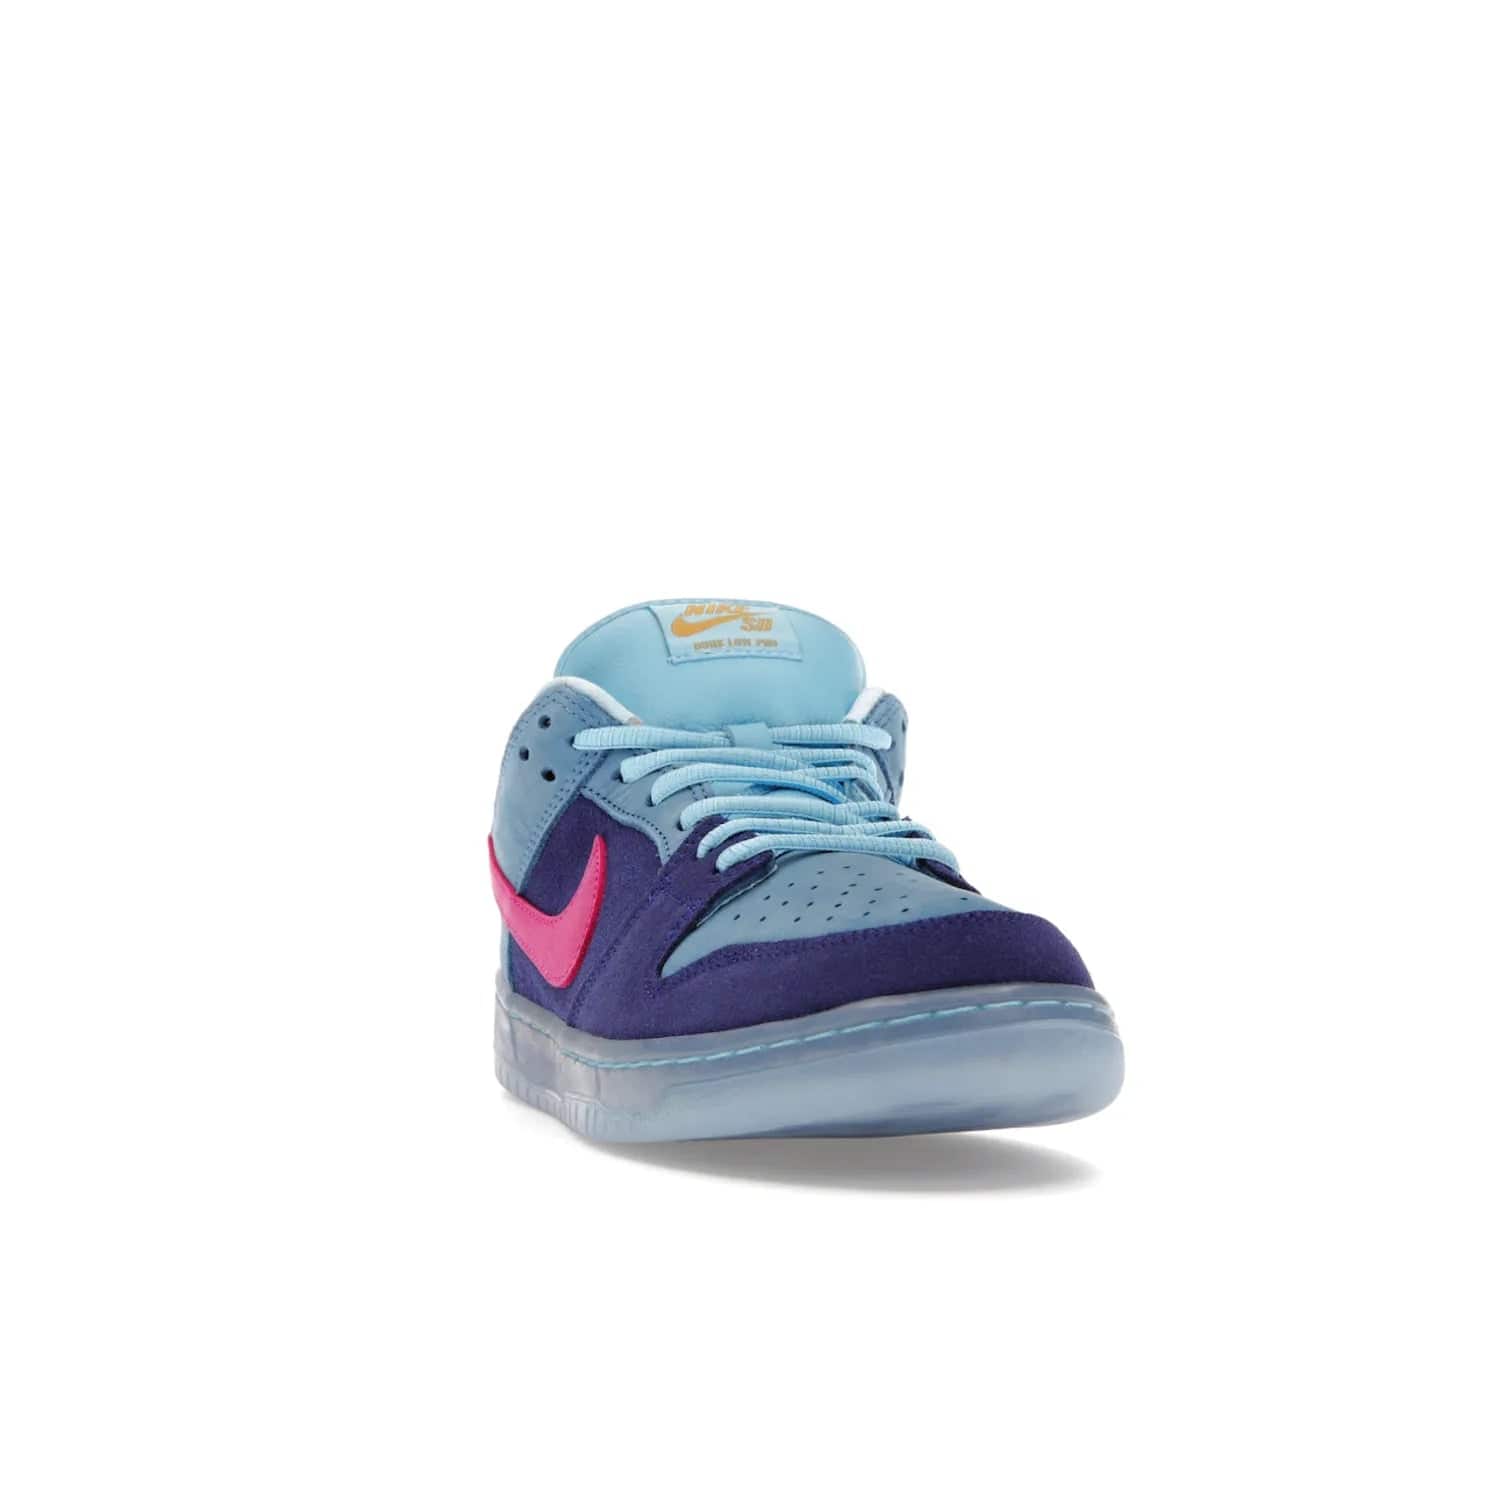 Nike SB Dunk Low Run The Jewels - Image 8 - Only at www.BallersClubKickz.com - The Nike SB Dunk Low Run The Jewels pays tribute to the Run the Jewels 3 album cover. It features a blue suede upper with pink suede accents, gold branding and 3 lace sets. RTJ insoles complete this limited edition sneaker. Get it now for your shoe collection.